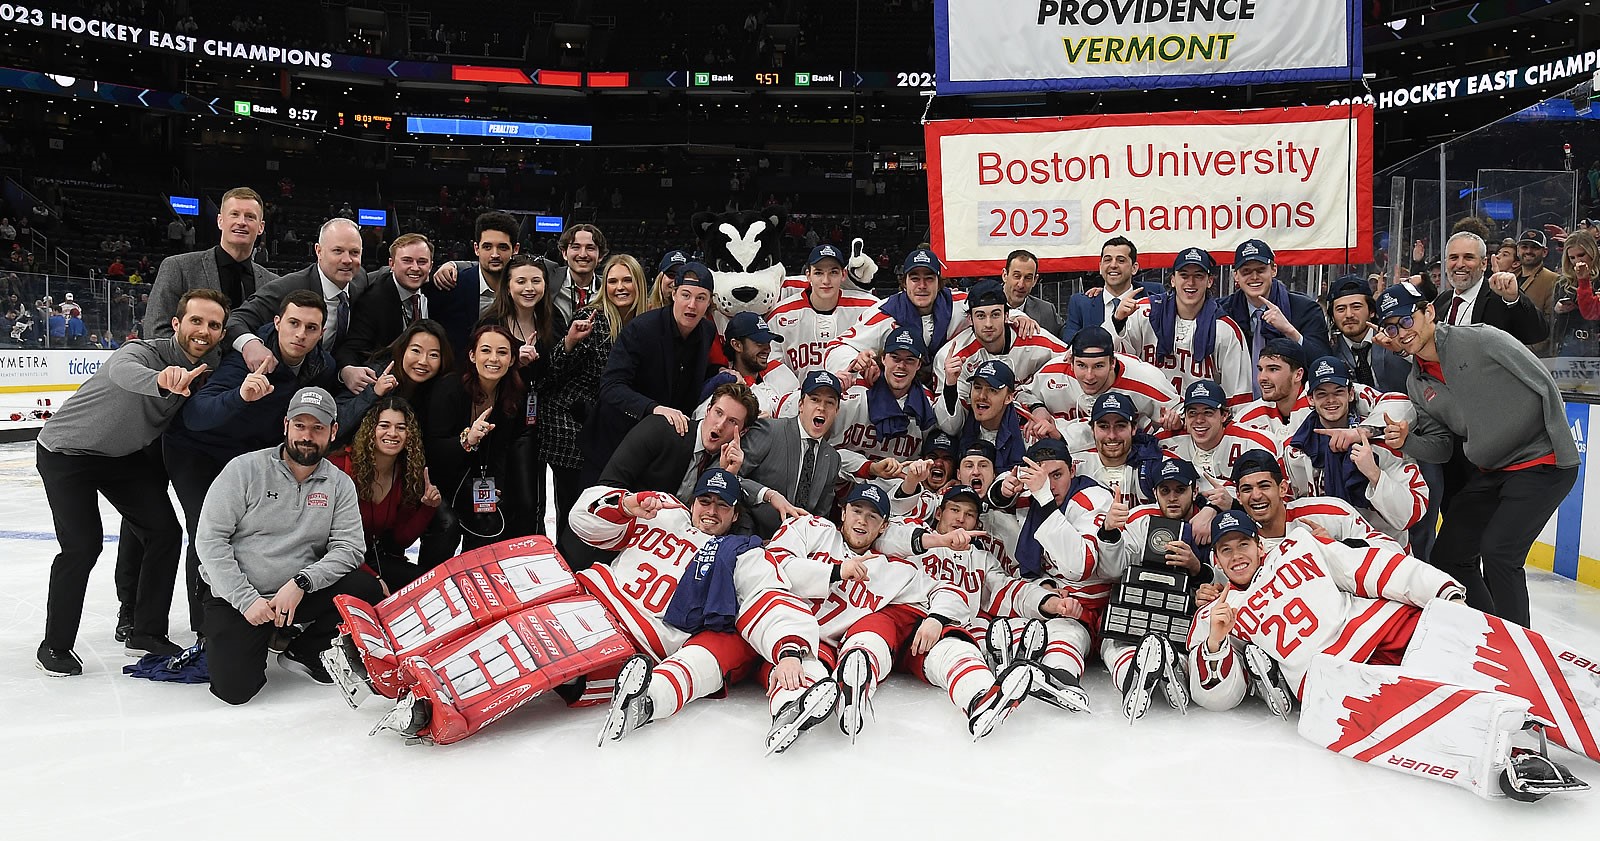 Women's Hockey Headed to National Championship, Wins 3-2 in Double OT -  Posted on March 17th, 2023 by CJ Siewert